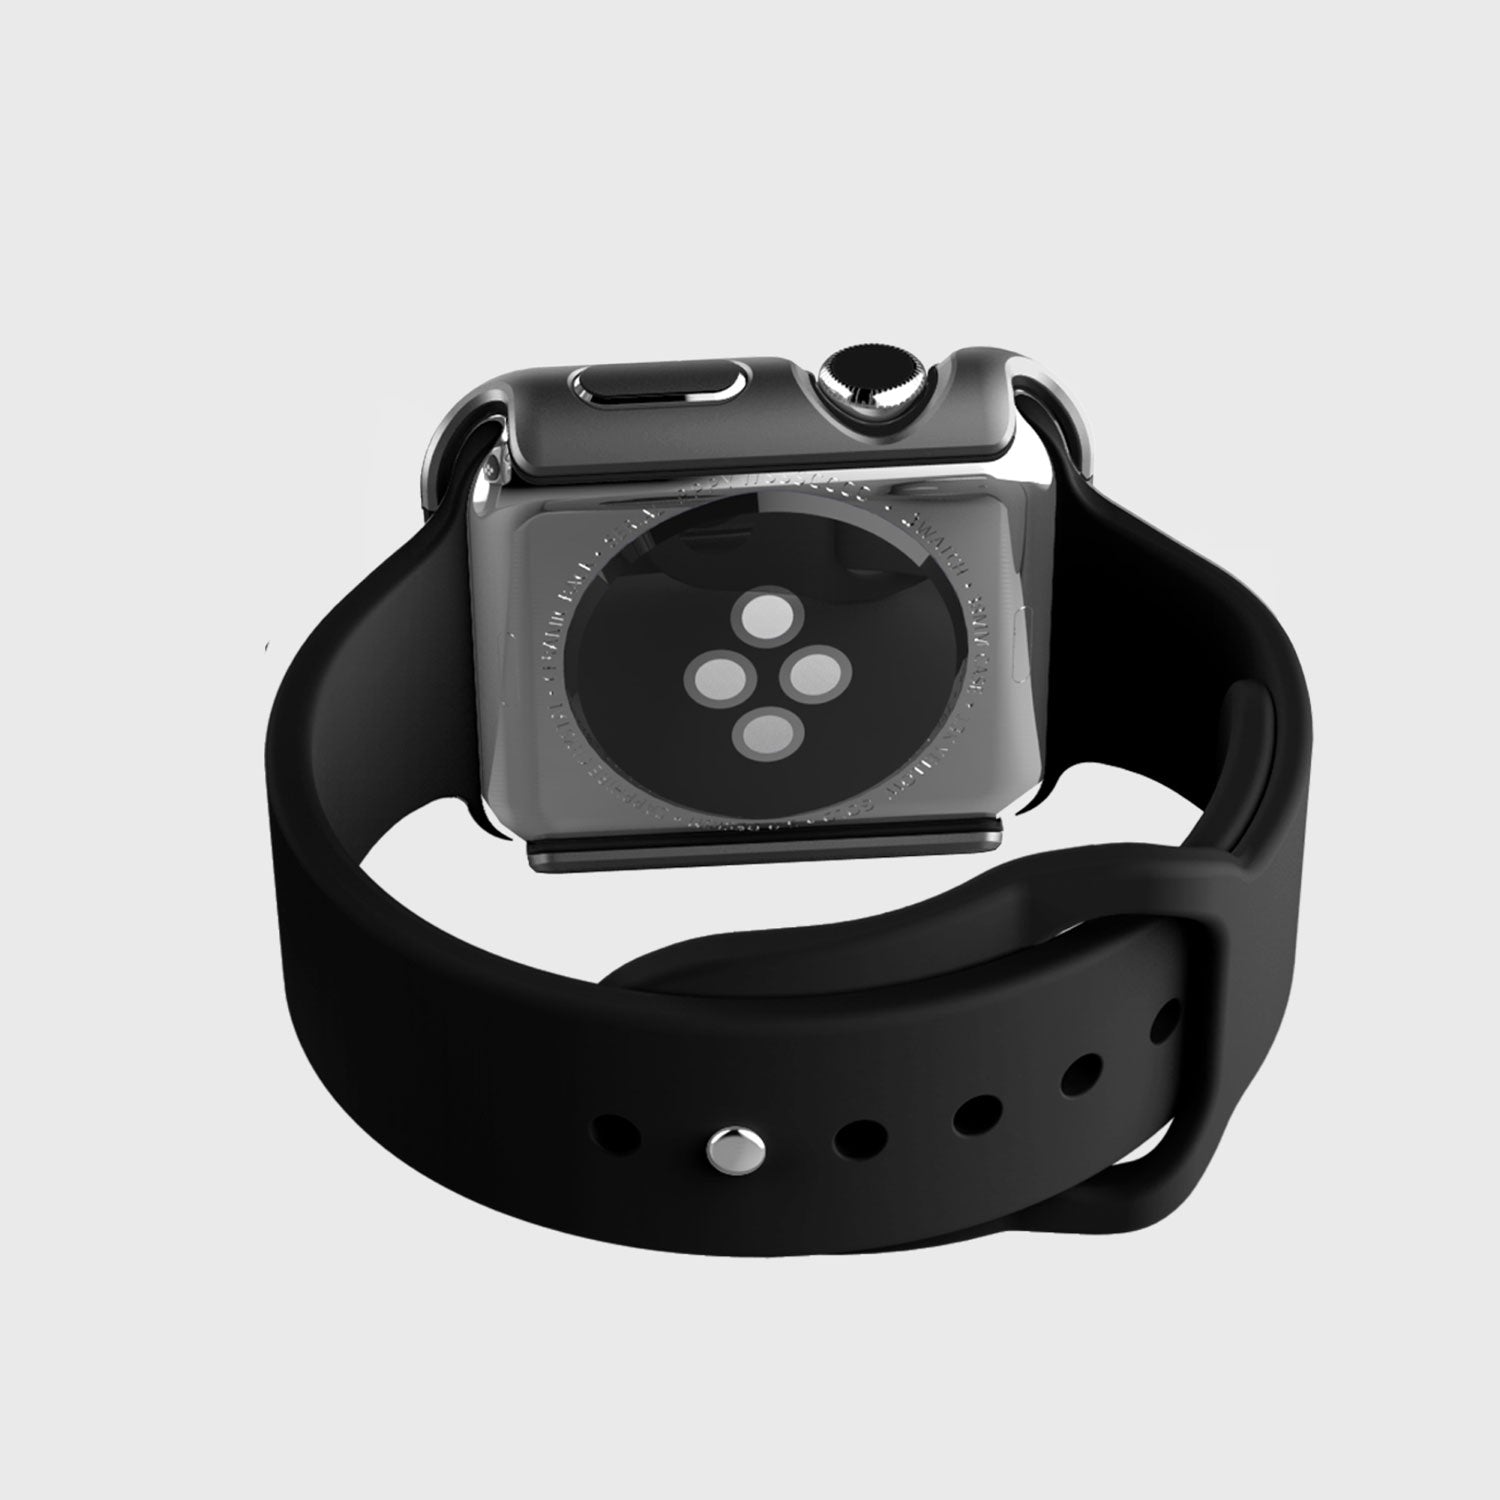 A black Raptic Apple Watch 44mm Case - EDGE with a premium machined anodized aluminum bumper protects it, displayed on a white background.